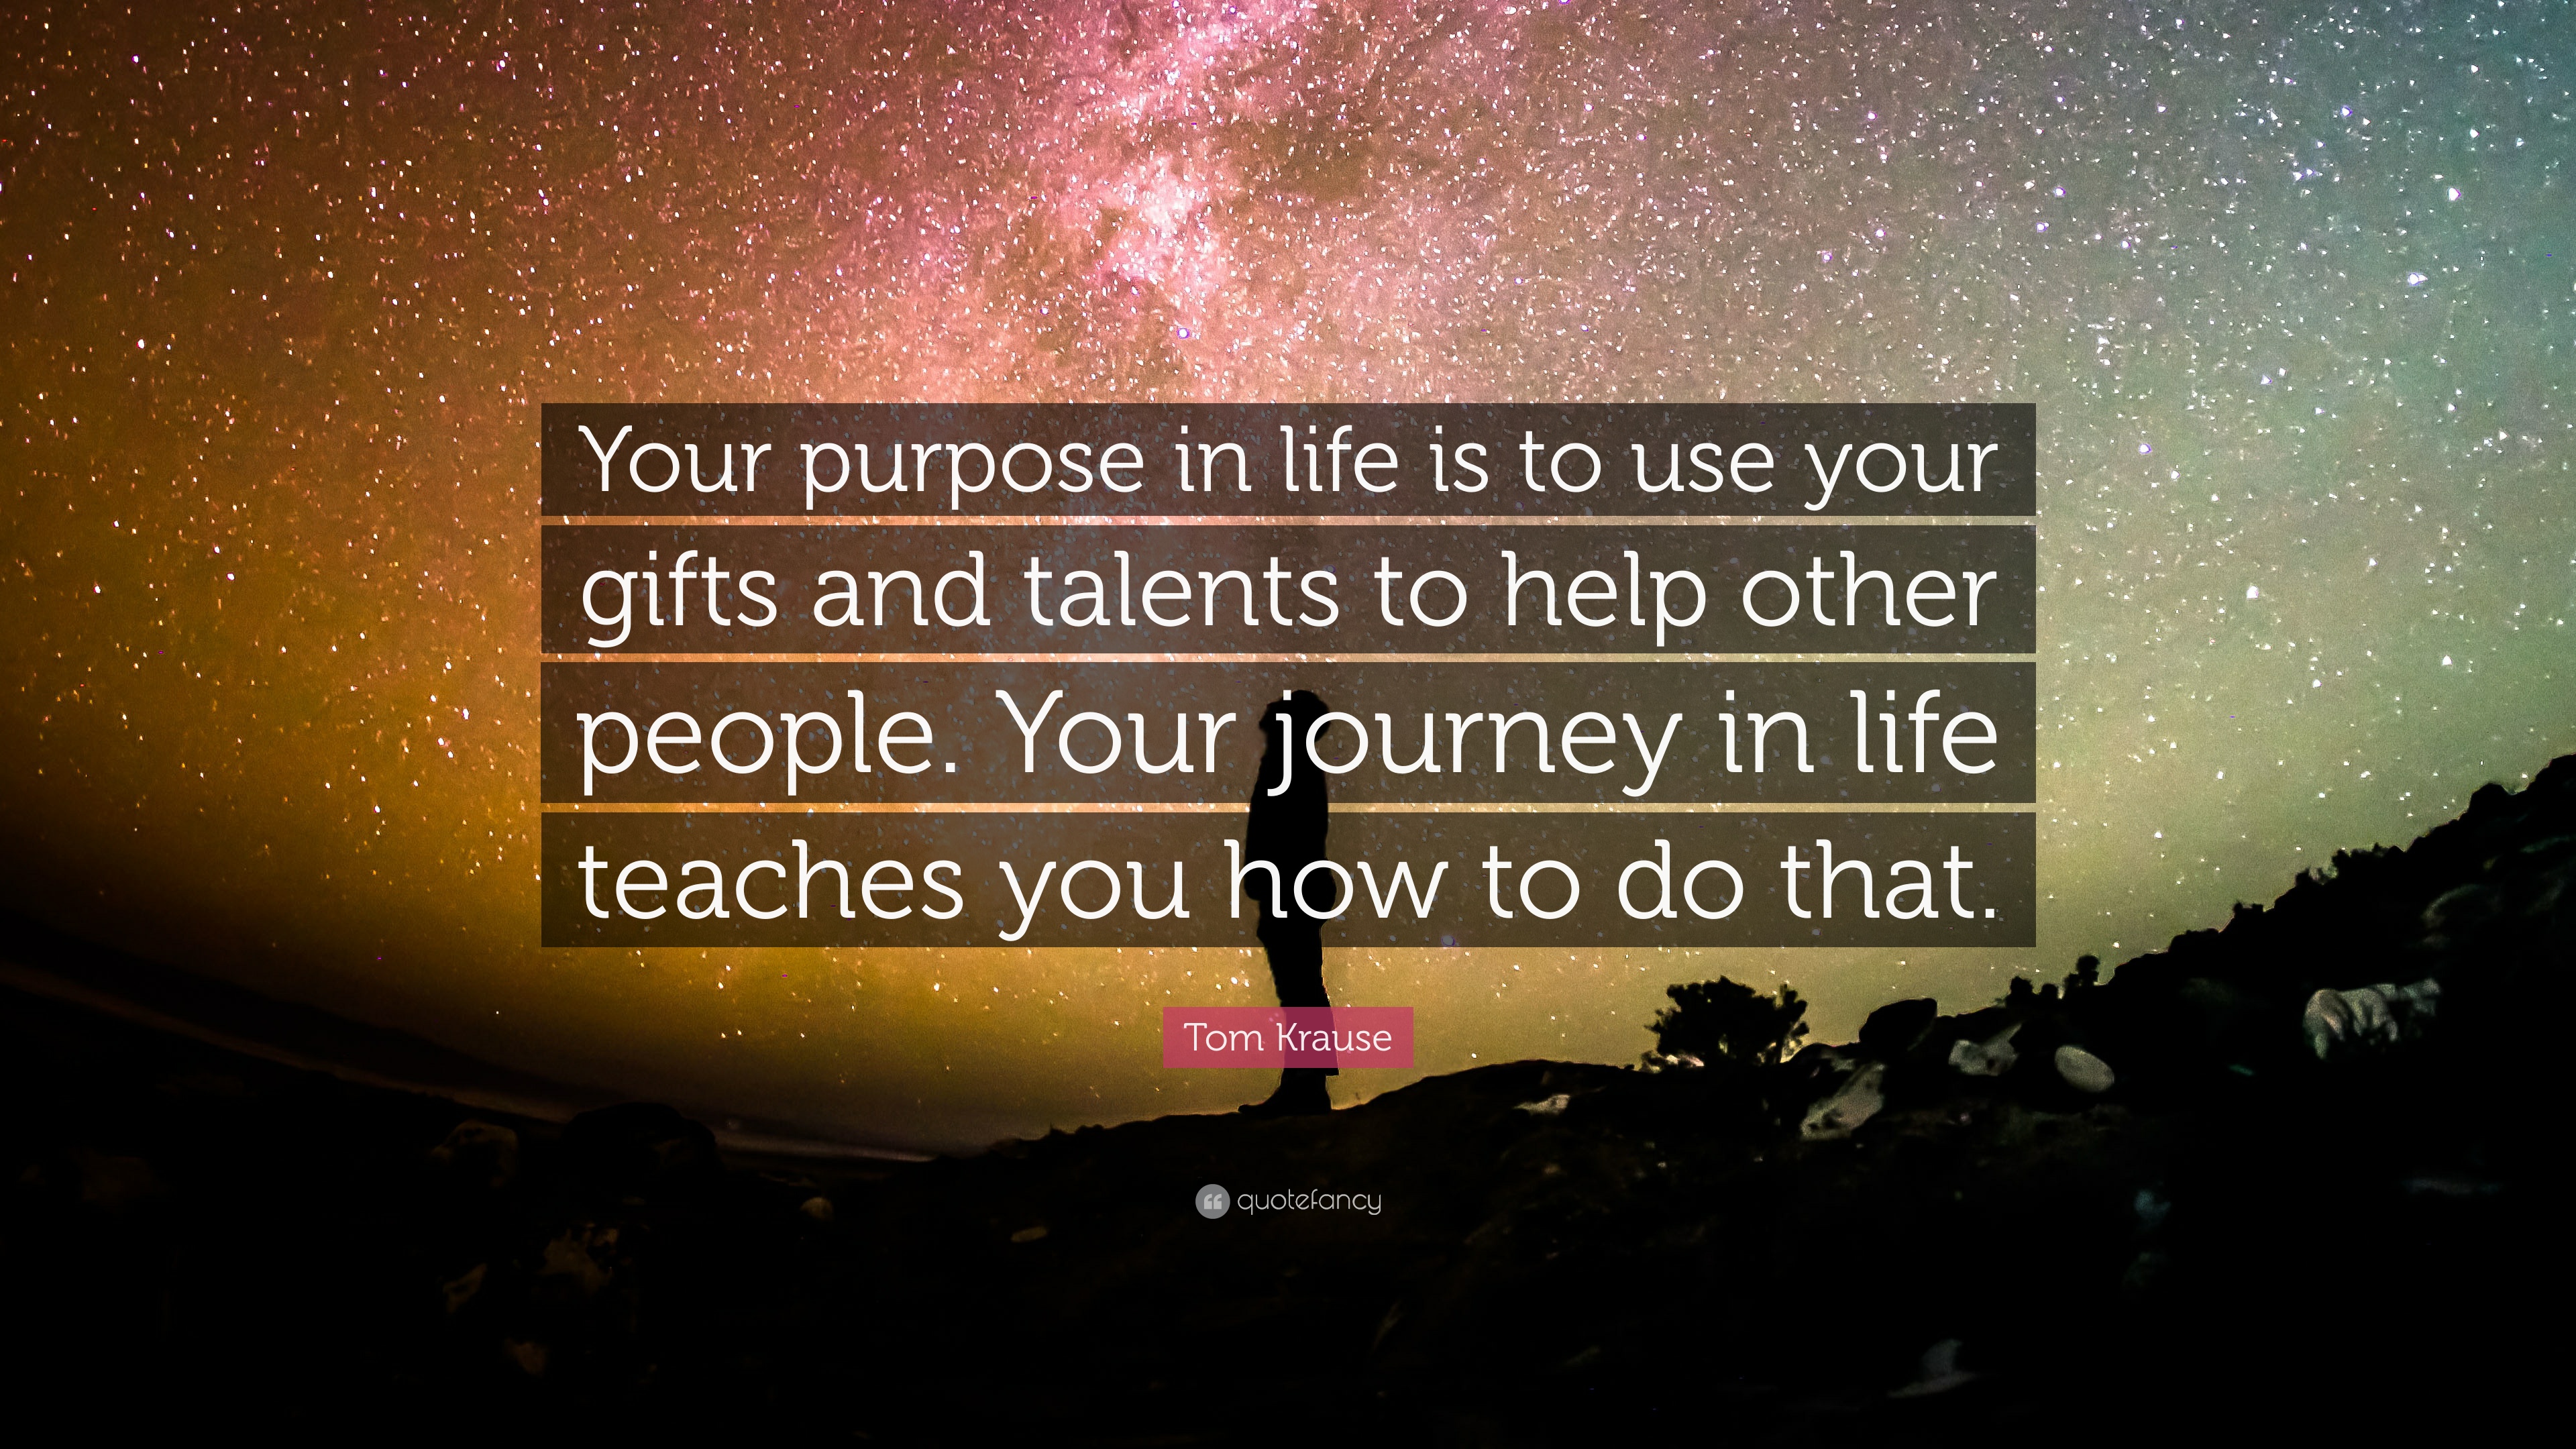 Tom Krause Quote: “Your purpose in life is to use your gifts